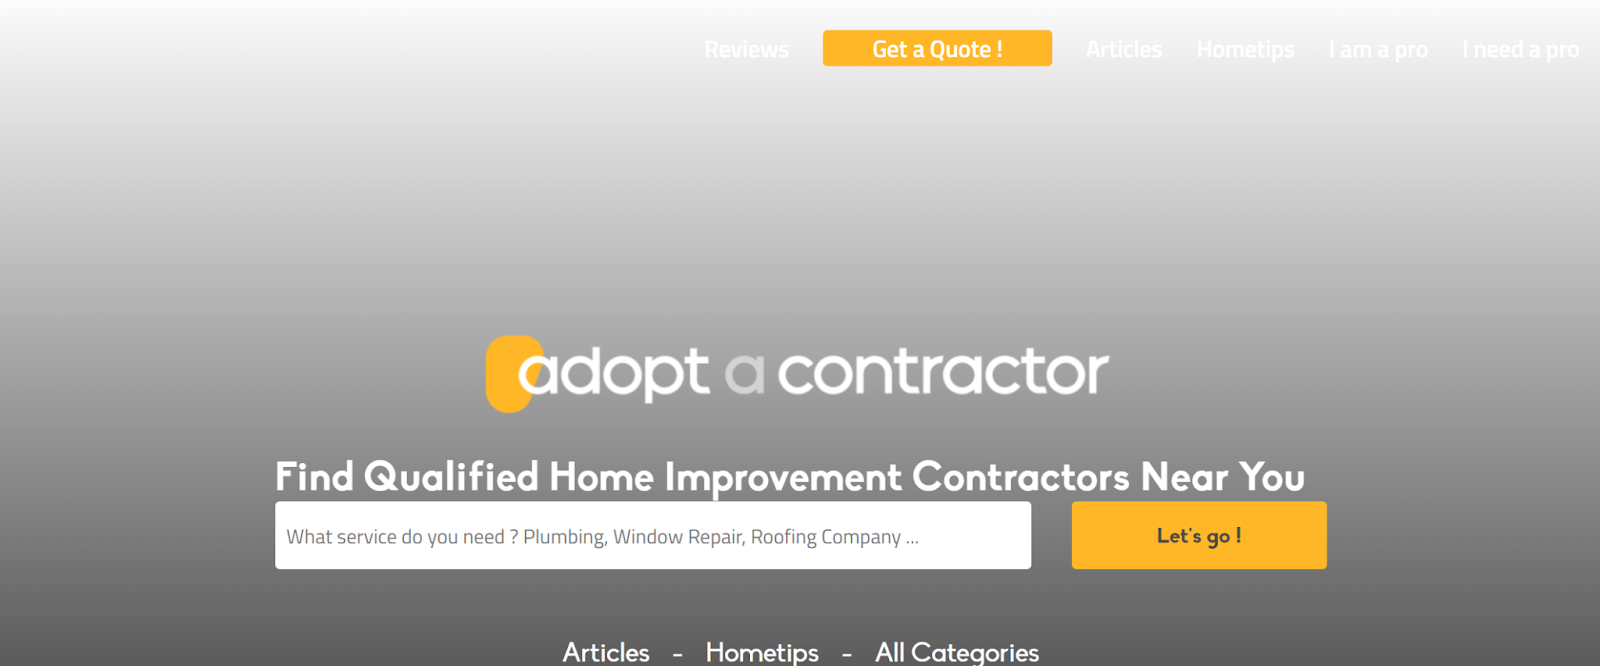 Adopt A Contractor home page